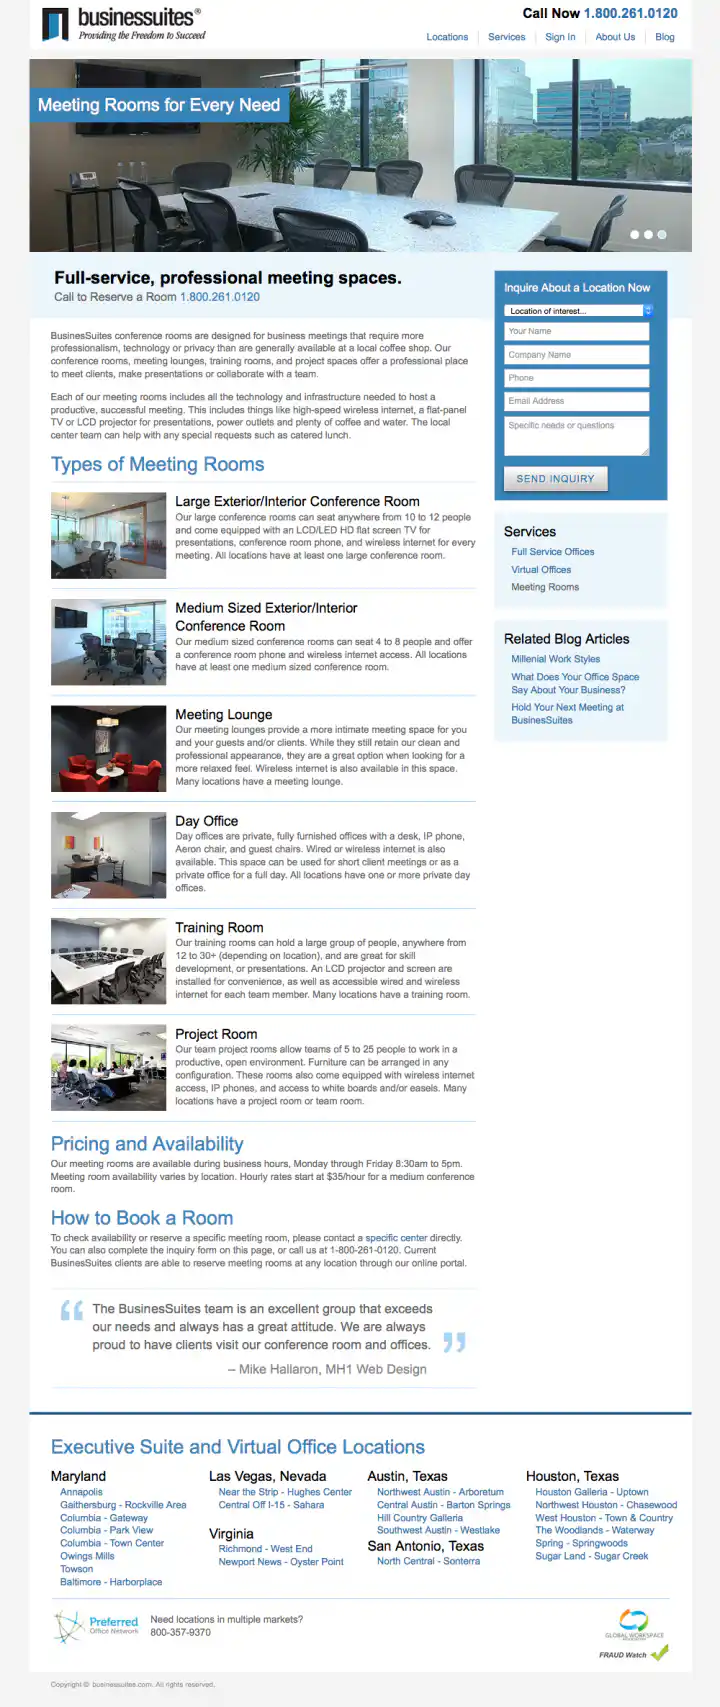 BusinesSuites Office Services Landing Page for Meeting Rooms